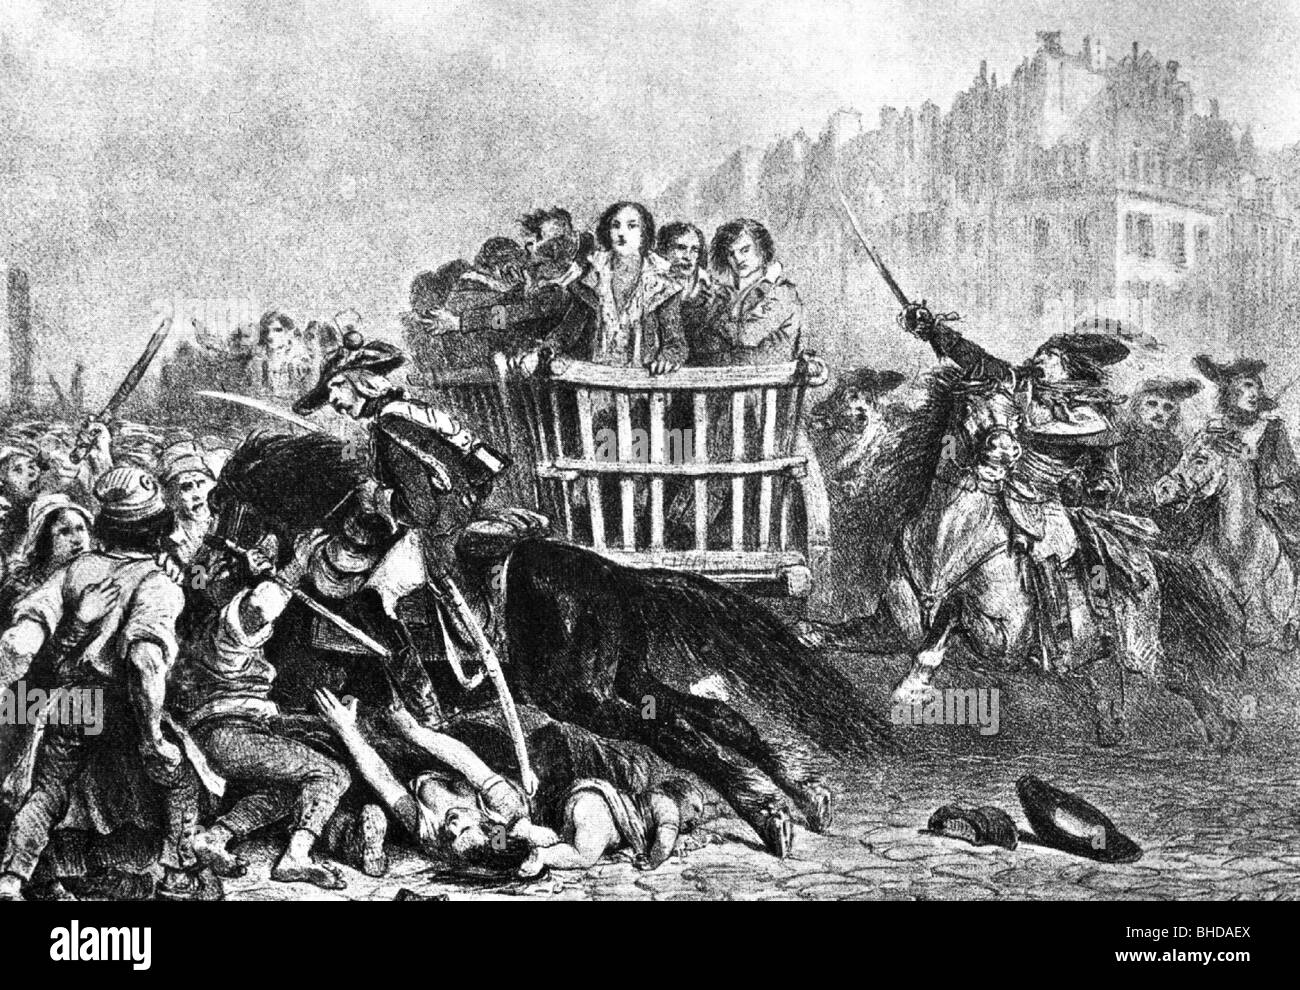 geography / travel, France, French Revolution 1789, reign of terror, the last cart is drving to guillotine, 1797, drawing by Auguste Raffet, 19th century, historic, historical, guillotine, National Guard, convict, victims, enraged crowds, crowd of people, insurgent, insurgents, rebel, rebels, revolter, revolters, citizen, insurgency, revolt, rebellion, insurgencies, revolts, rebellions, be in revolt, wagon, on the way to execution, politics, event, events, Stock Photo